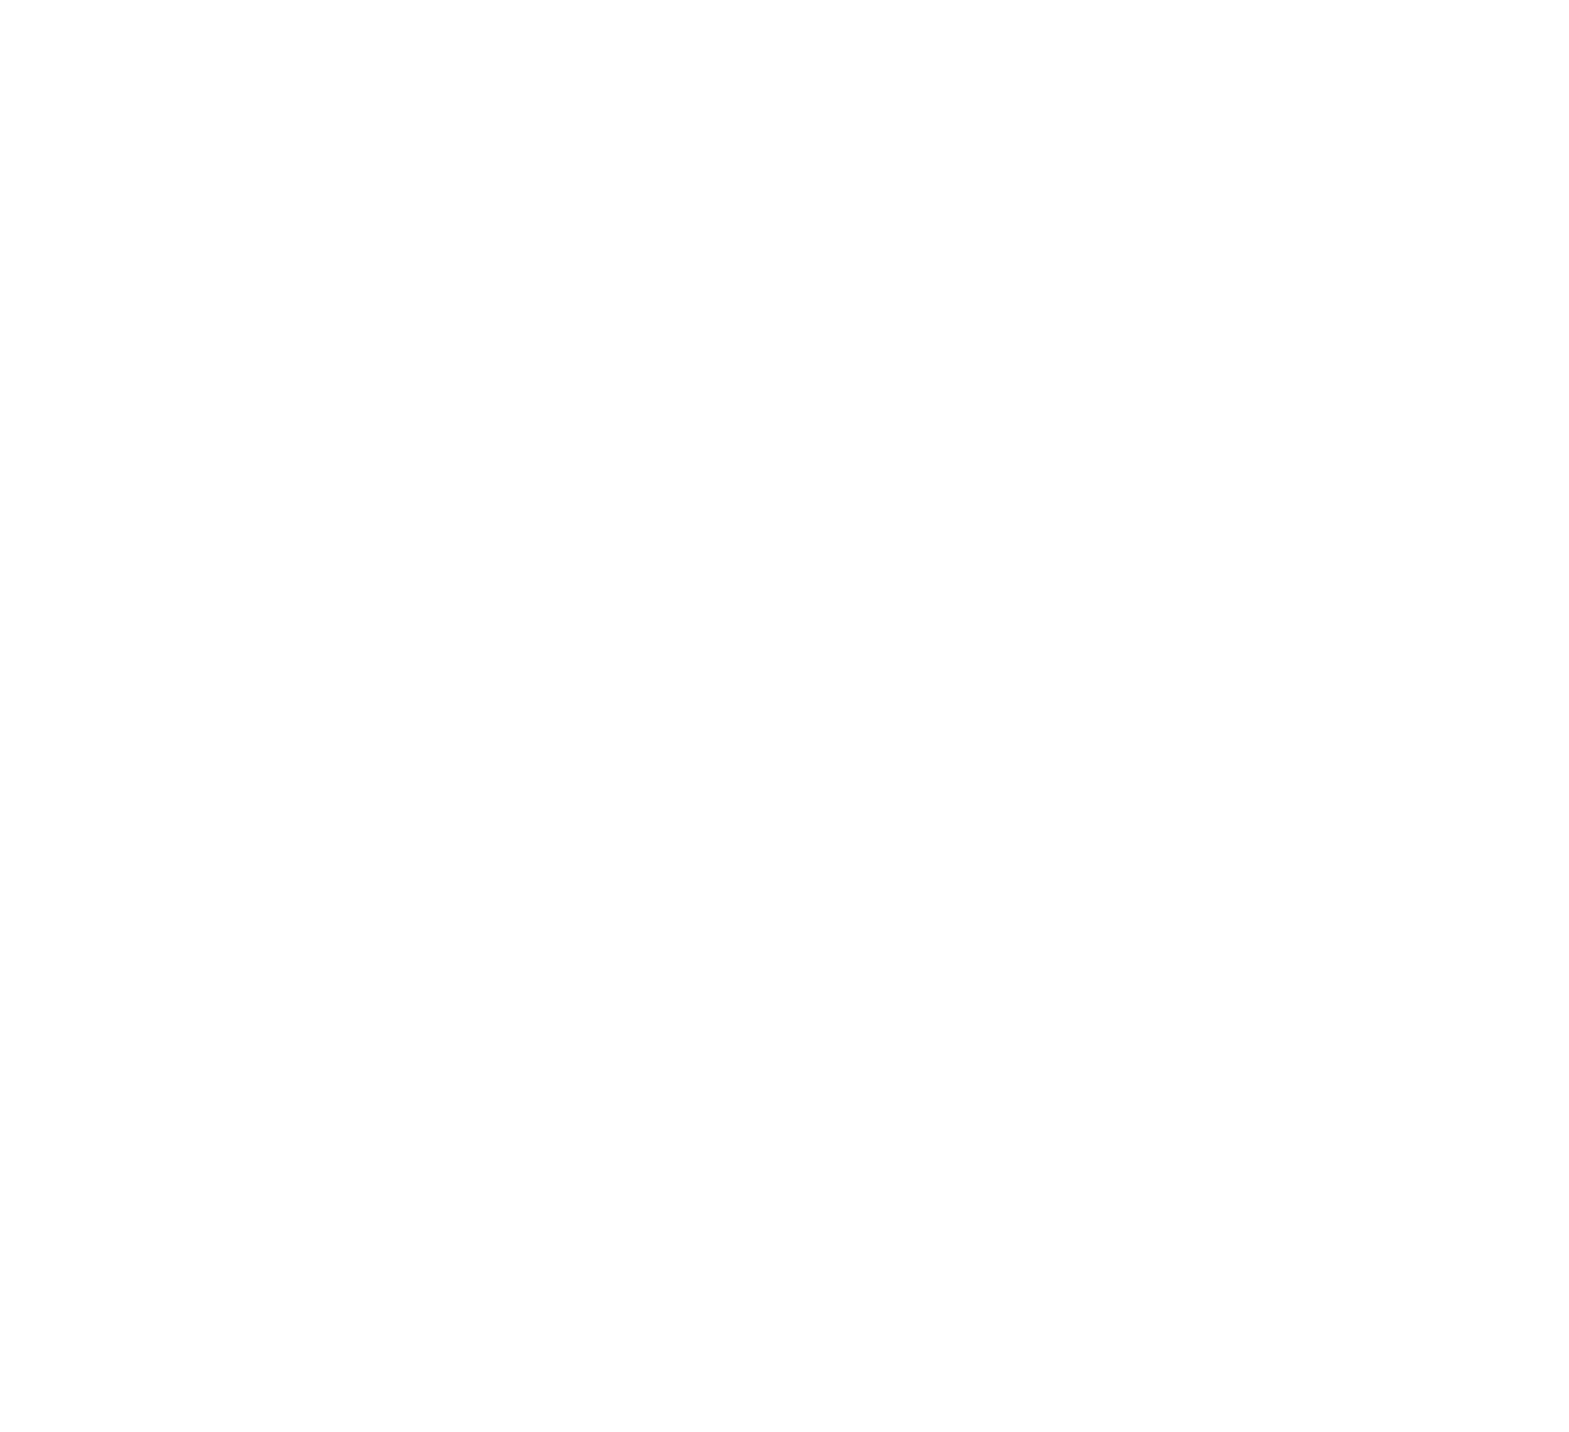 Chinese Estates Holdings logo in transparent PNG and vectorized SVG formats